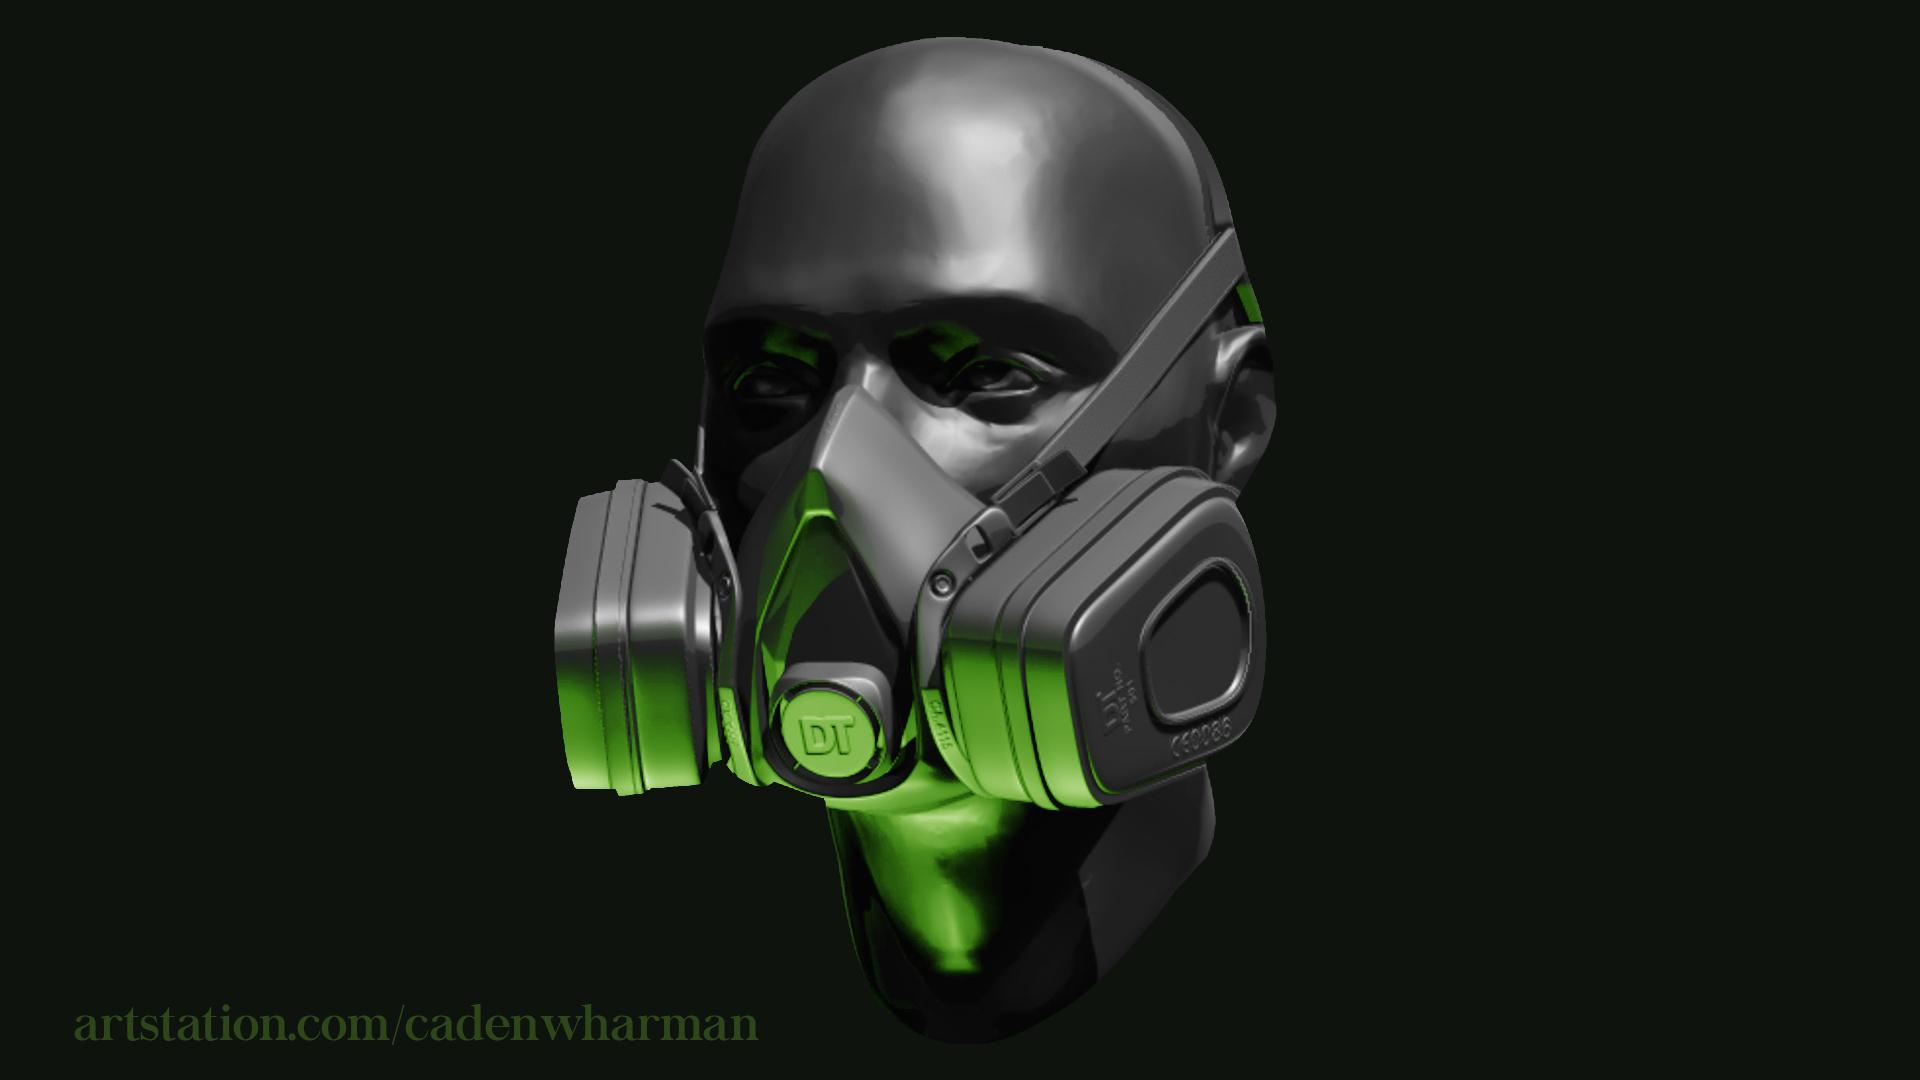 3D sculpted person from neck up wearing a gas mask by Caden Harman